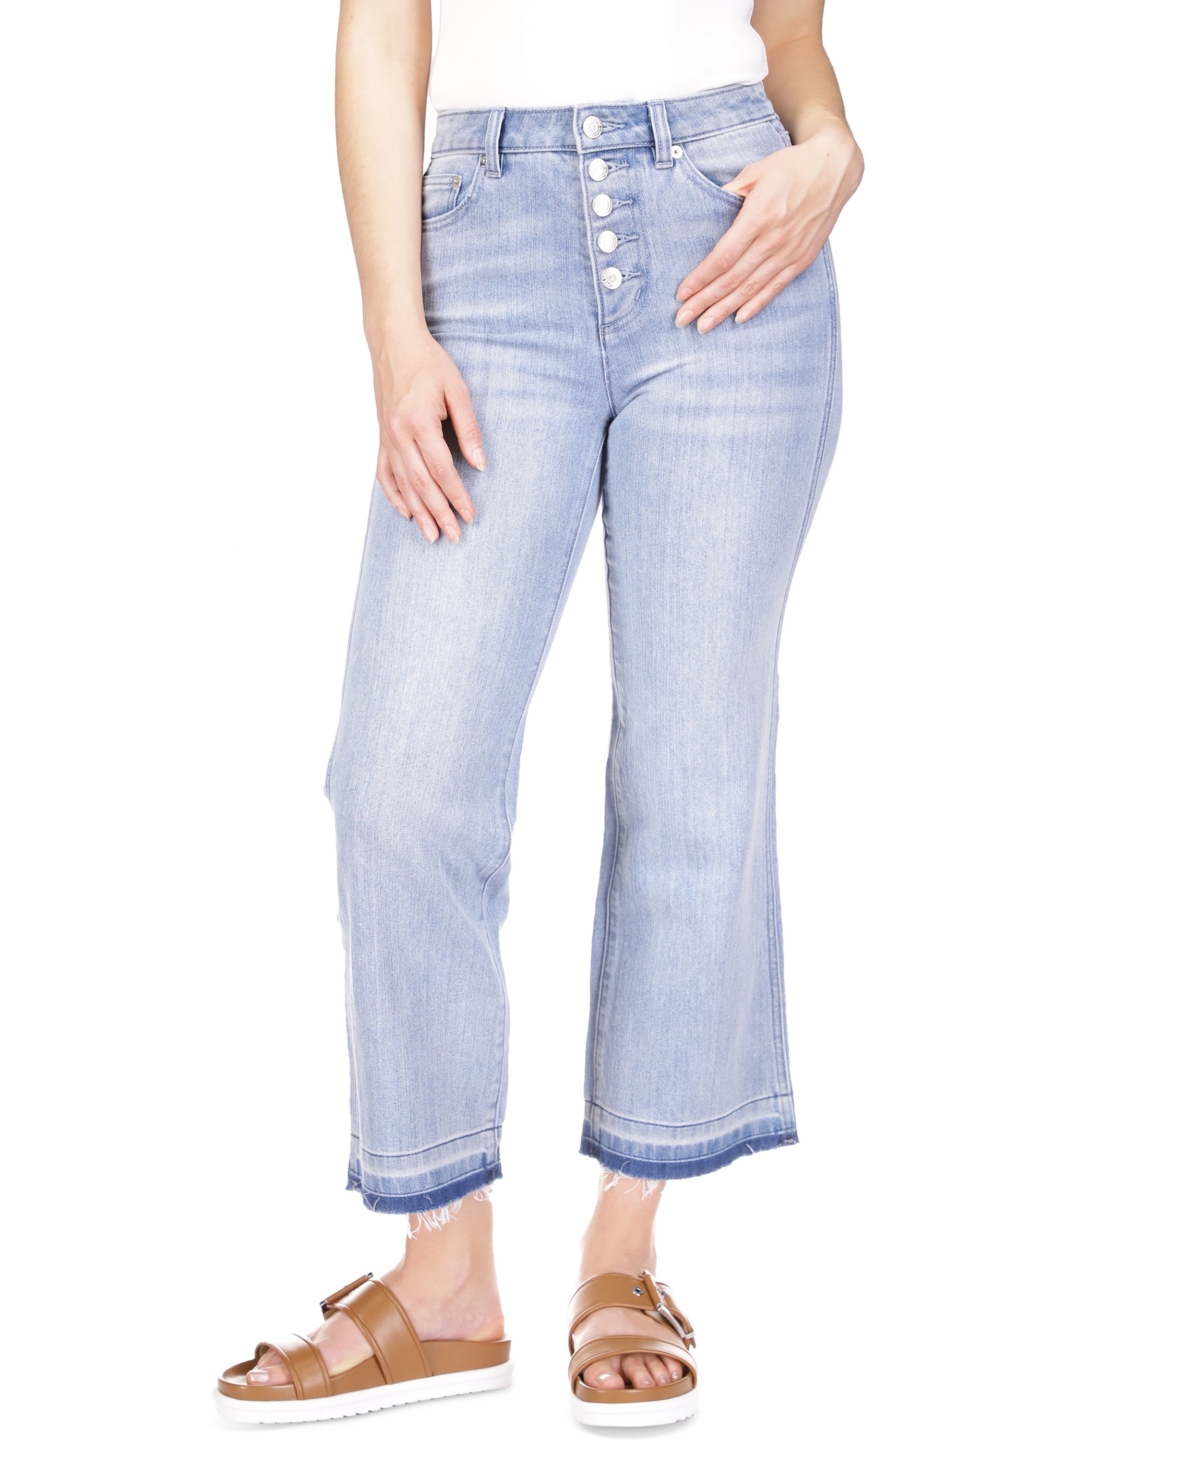 Michael Michael Kors Women's Button-Fly Flared Cropped High-Rise Jeans - Sky Haze